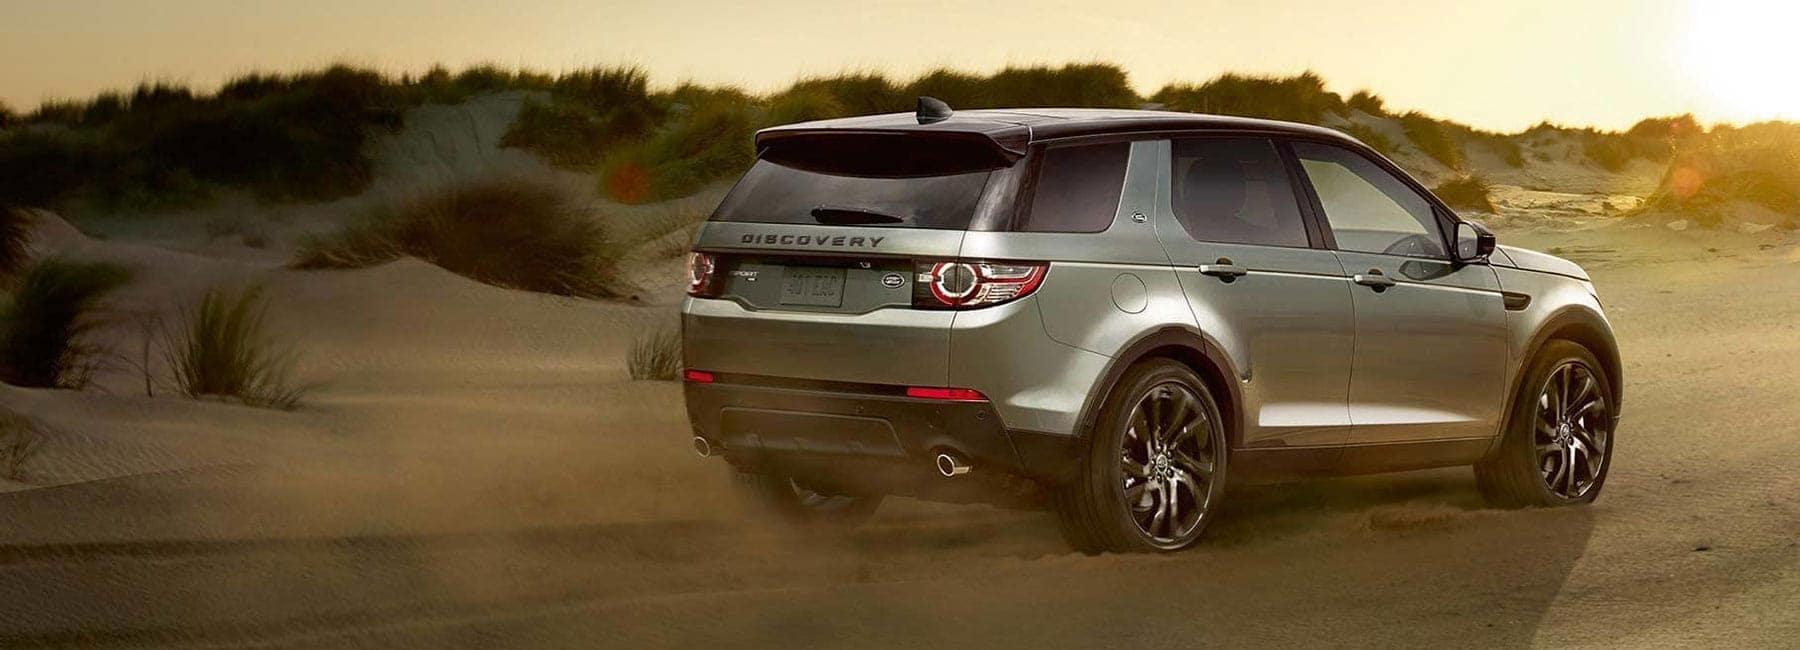 Discovery-Sport-Banner